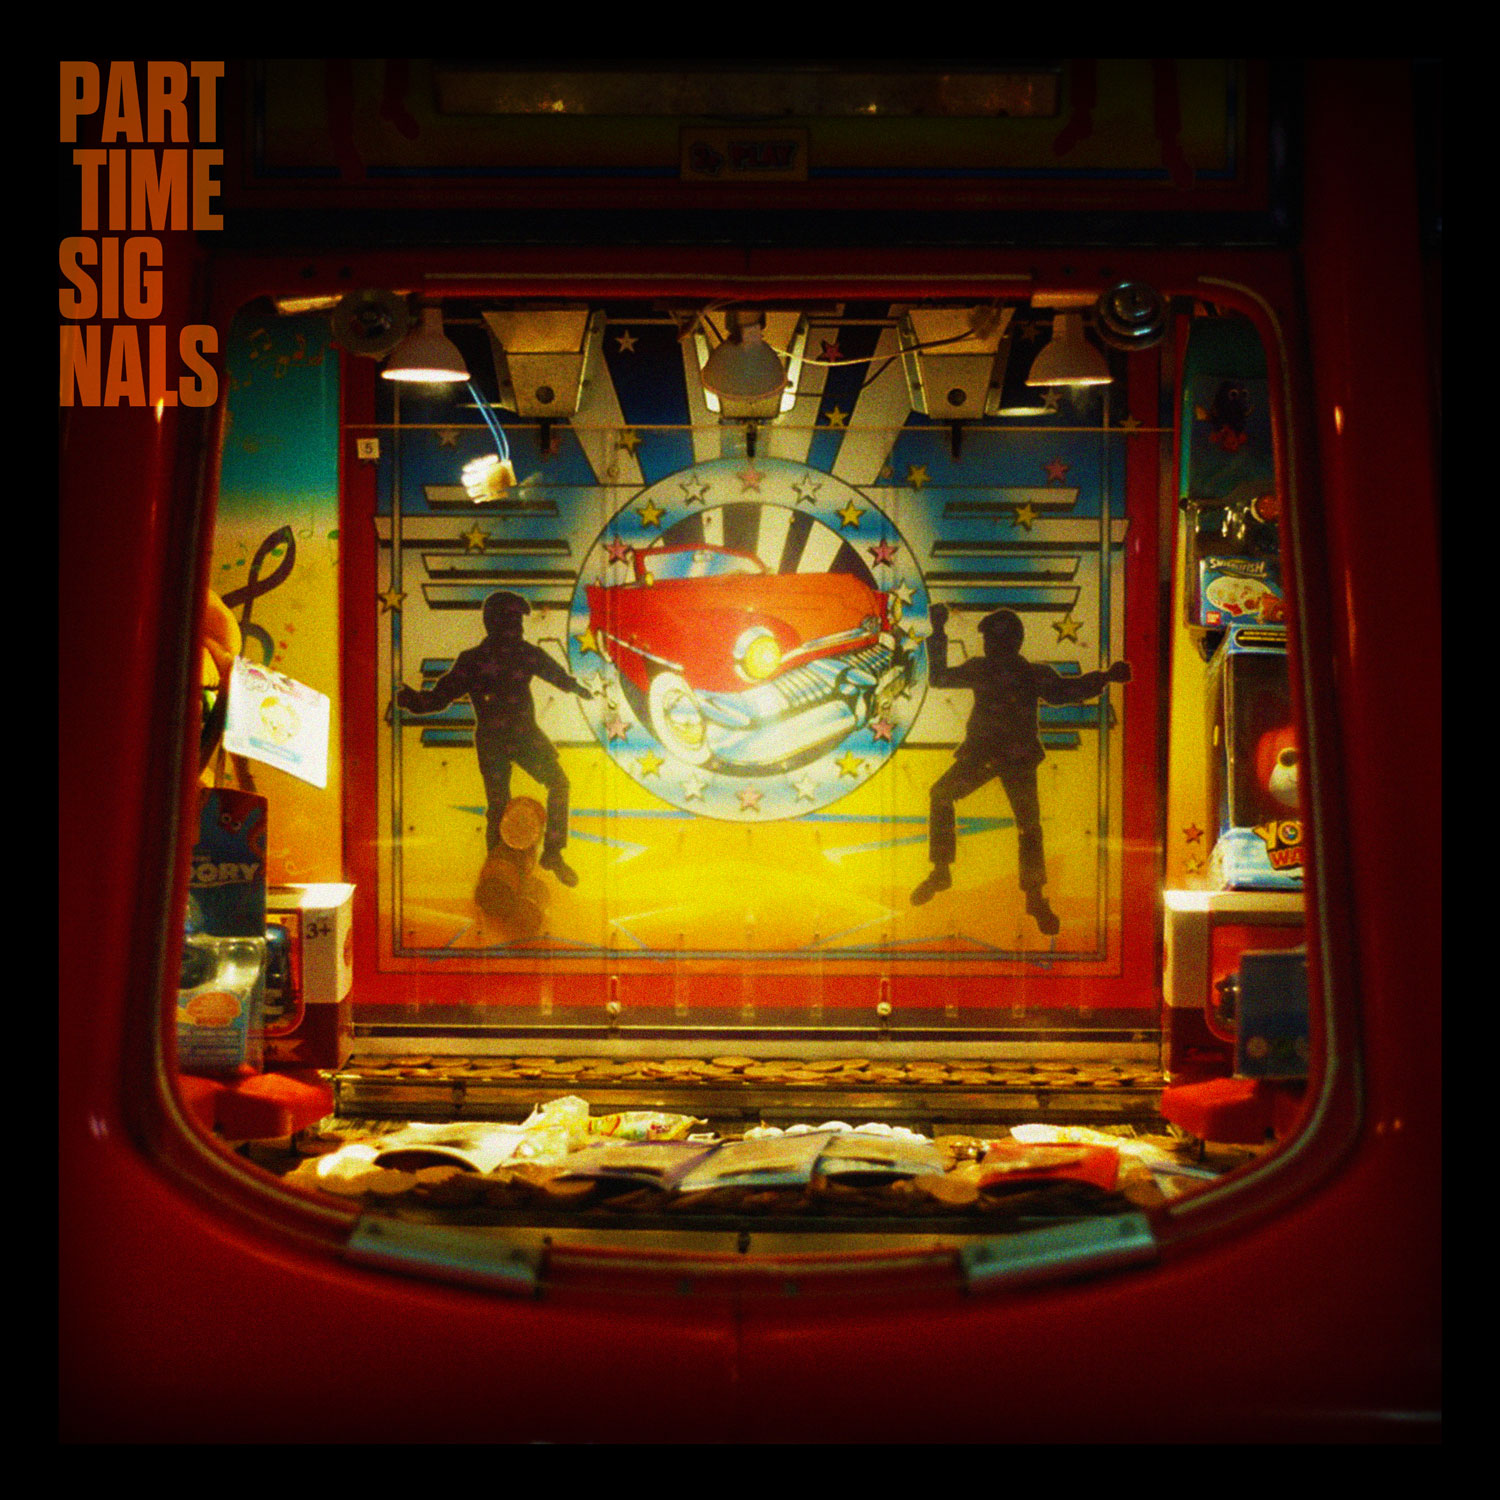 DEBUT ALBUM REVIEW: Another Day in Paradise by Part Time Signals